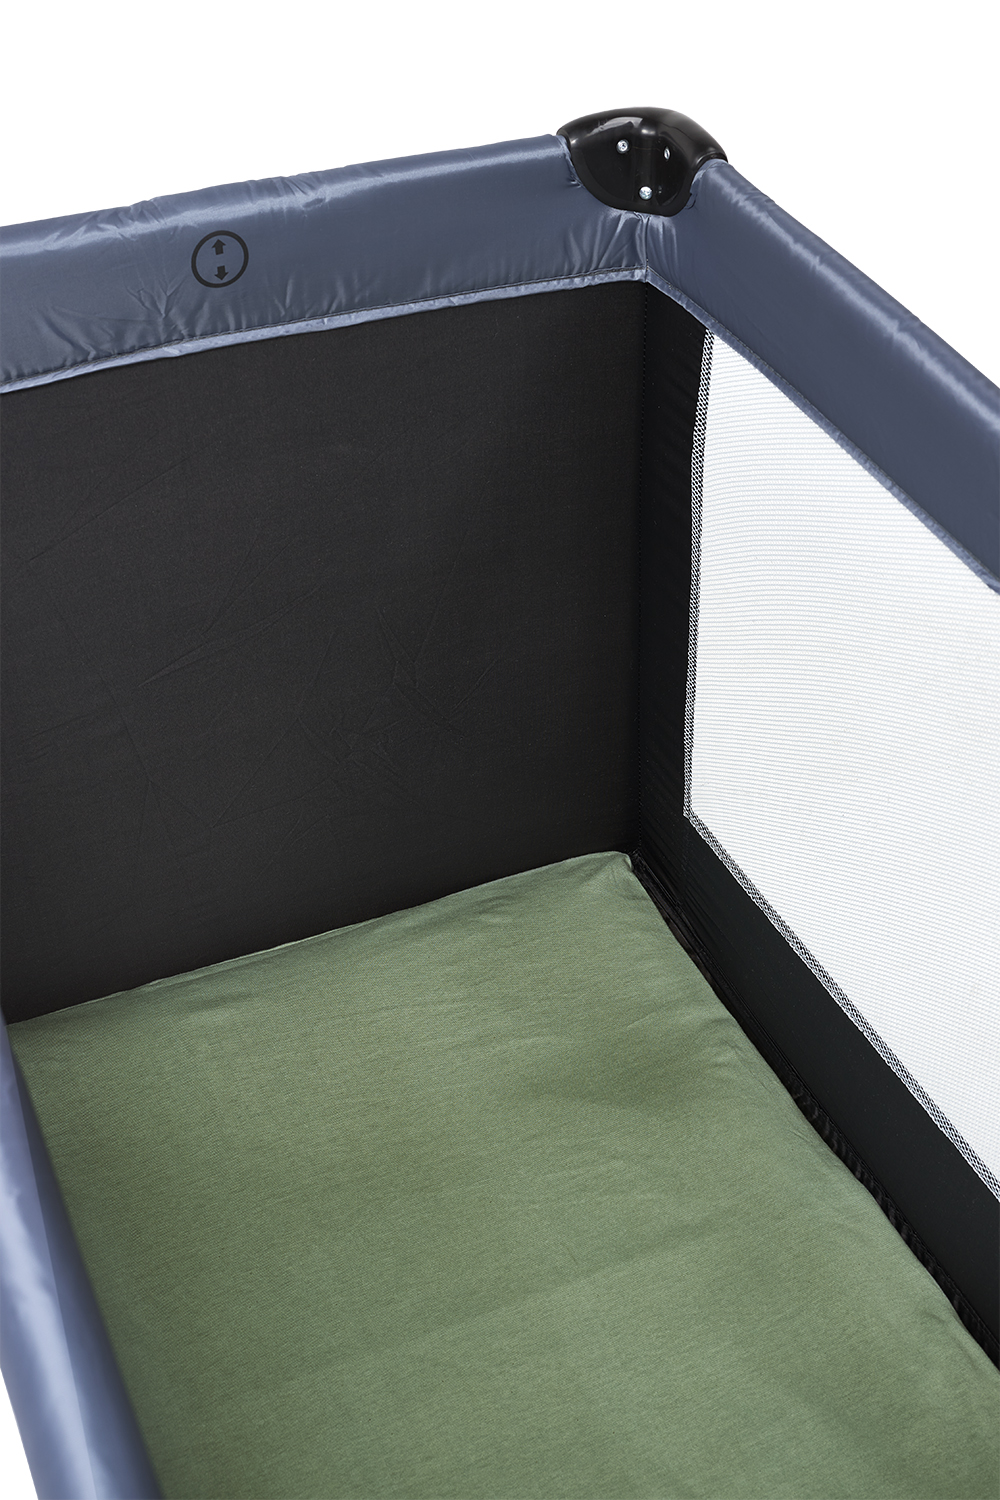 Campingbed matrashoes deluxe Uni - forest green - 60x120cm